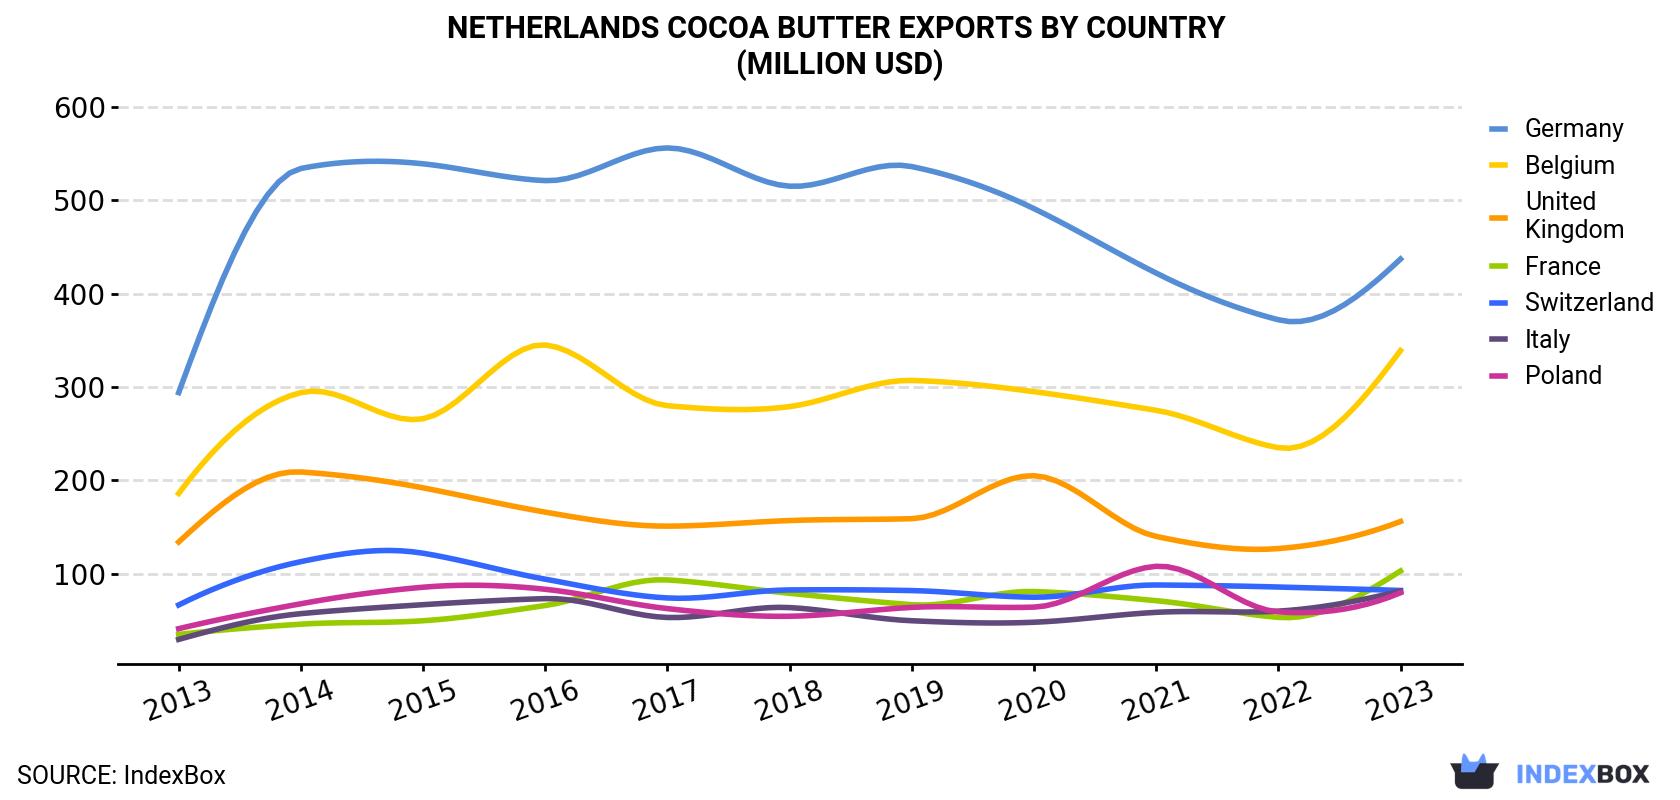 Netherlands Cocoa Butter Exports By Country (Million USD)